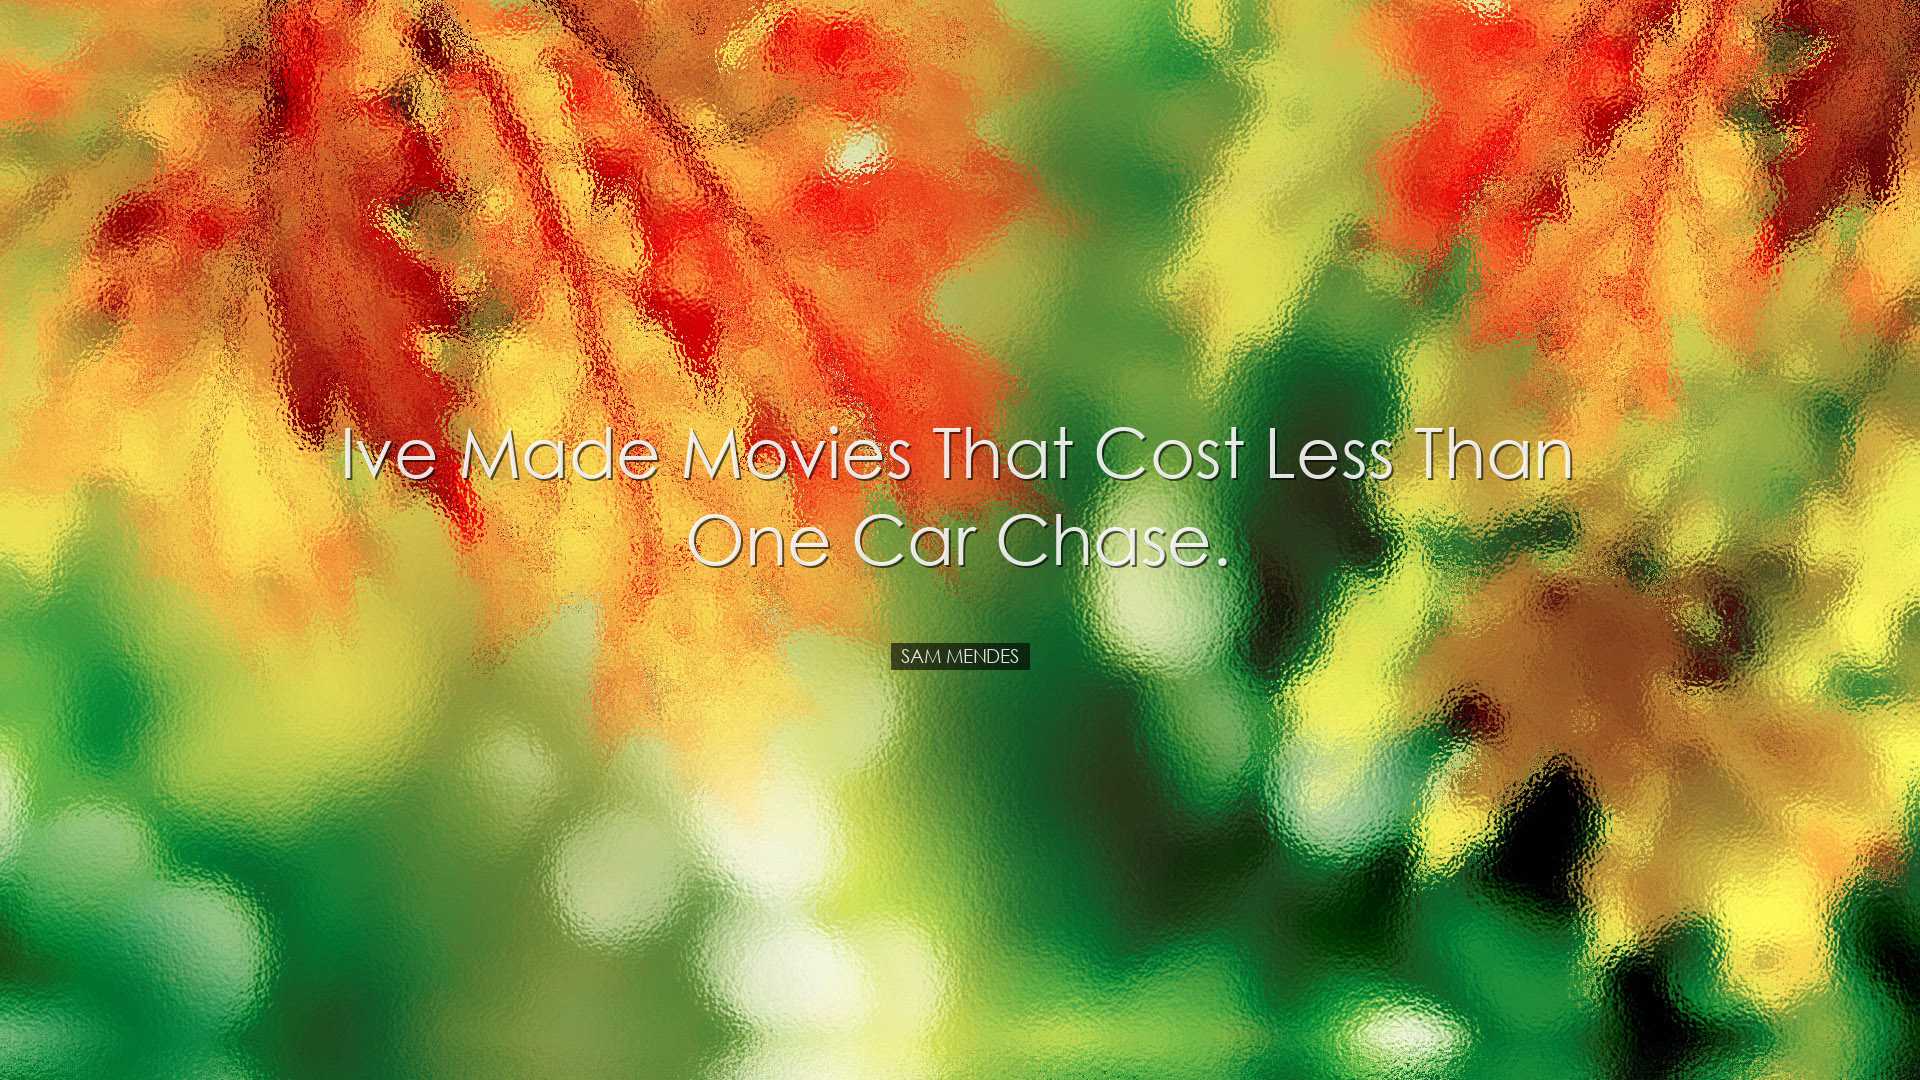 Ive made movies that cost less than one car chase. - Sam Mendes